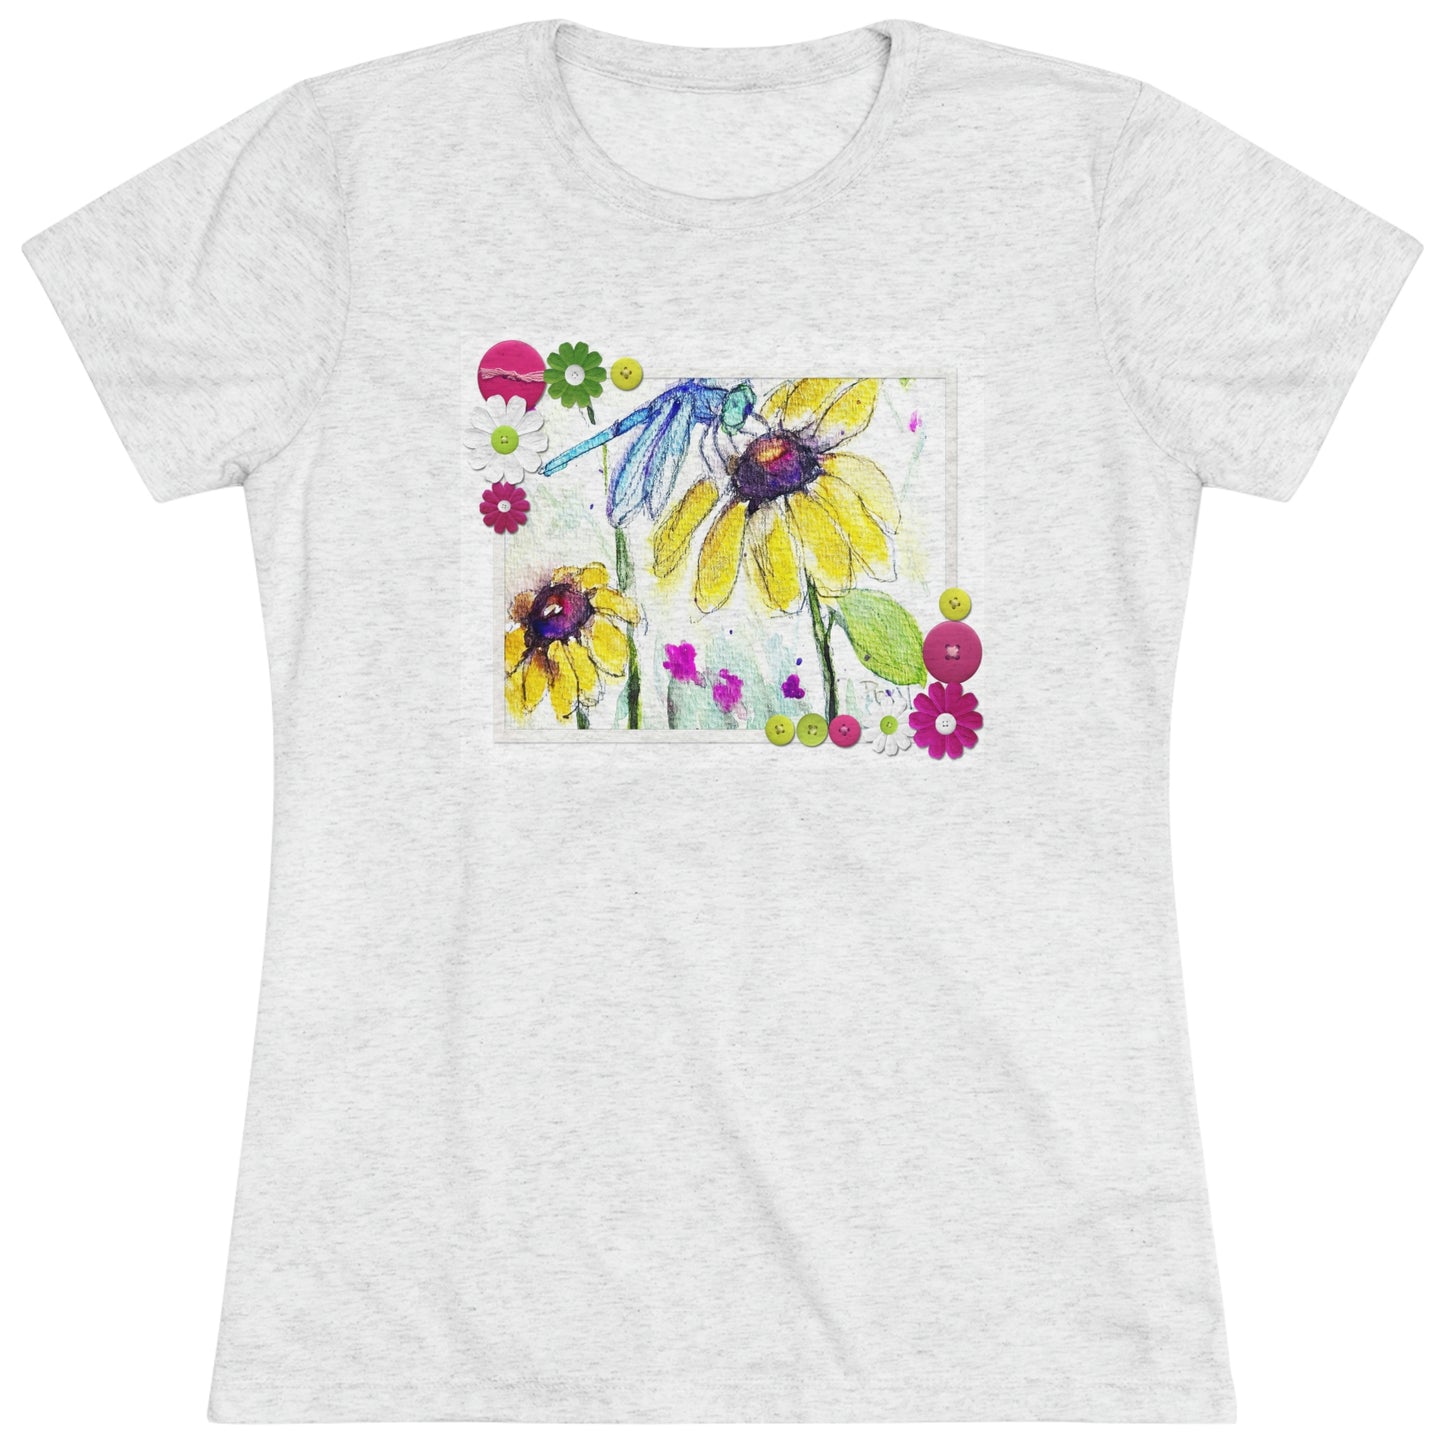 Blue Dragonfly Women's fitted Triblend Tee  tee shirt